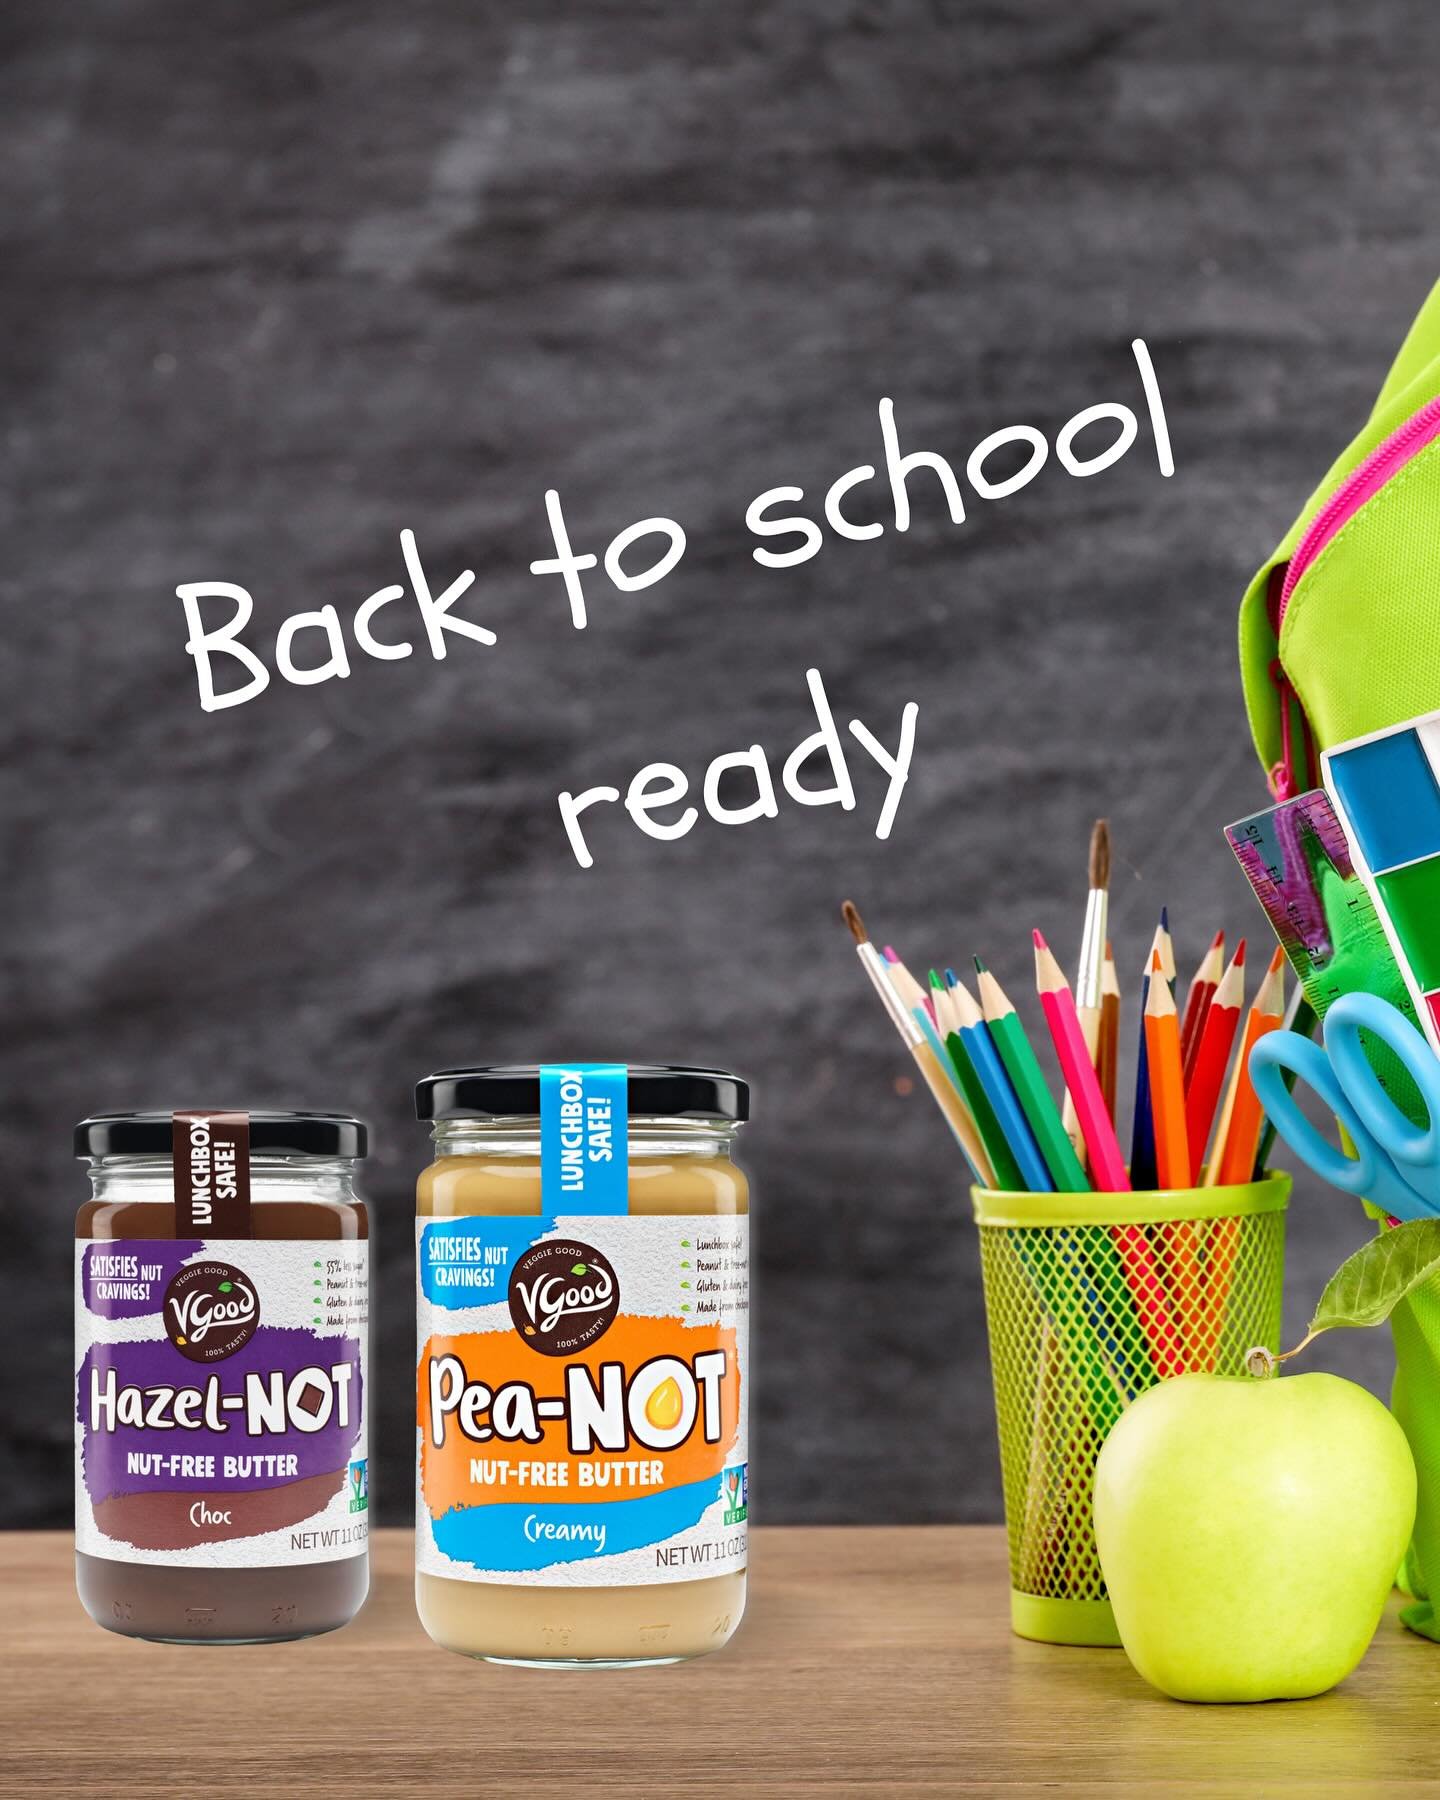 Term 2 let&rsquo;s do this 👊

🛒 stockists link in bio or available direct on our website

#schoollunch #schoollunchbox #schoollunchideas #nutfree #peanutfree #allergenfriendly #foodallergy #nutfreeschool #nutfreevegan #vegan #peanot #hazelnot #vgoo